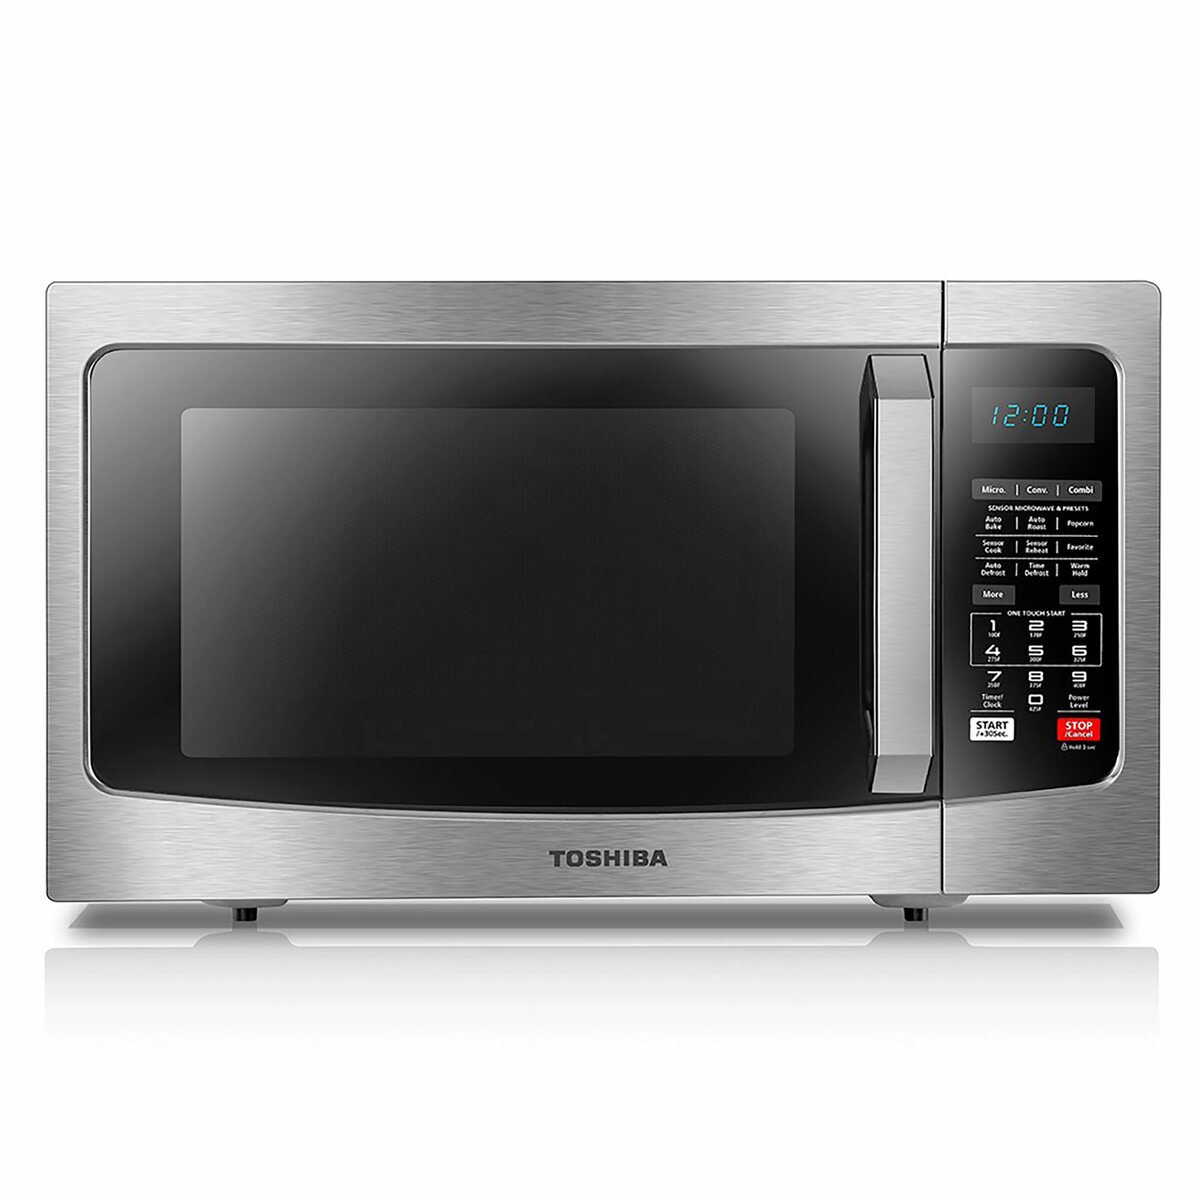 Buy Toshiba Convection Microwave Oven ML-EC42S 42LTR Online at Best Price | Microwave Ovens | Lulu Kuwait in Kuwait